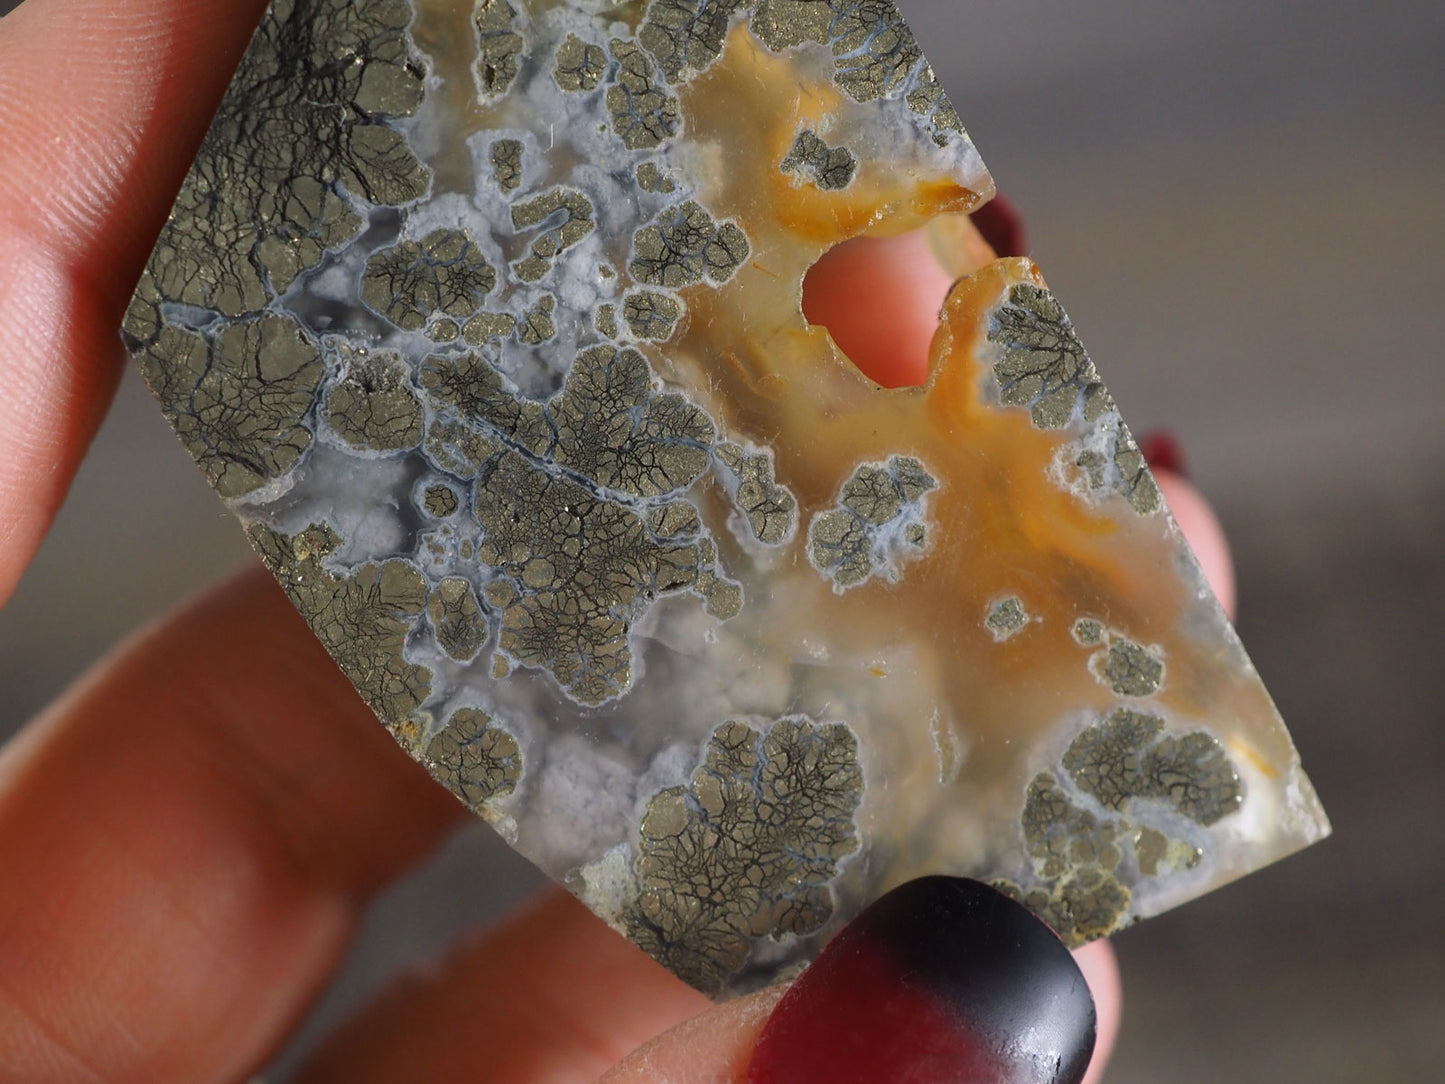 Pyrite Flower Agate Slab with Red Iron Deposits and Large Botryoidal Elements - Closeup in hand